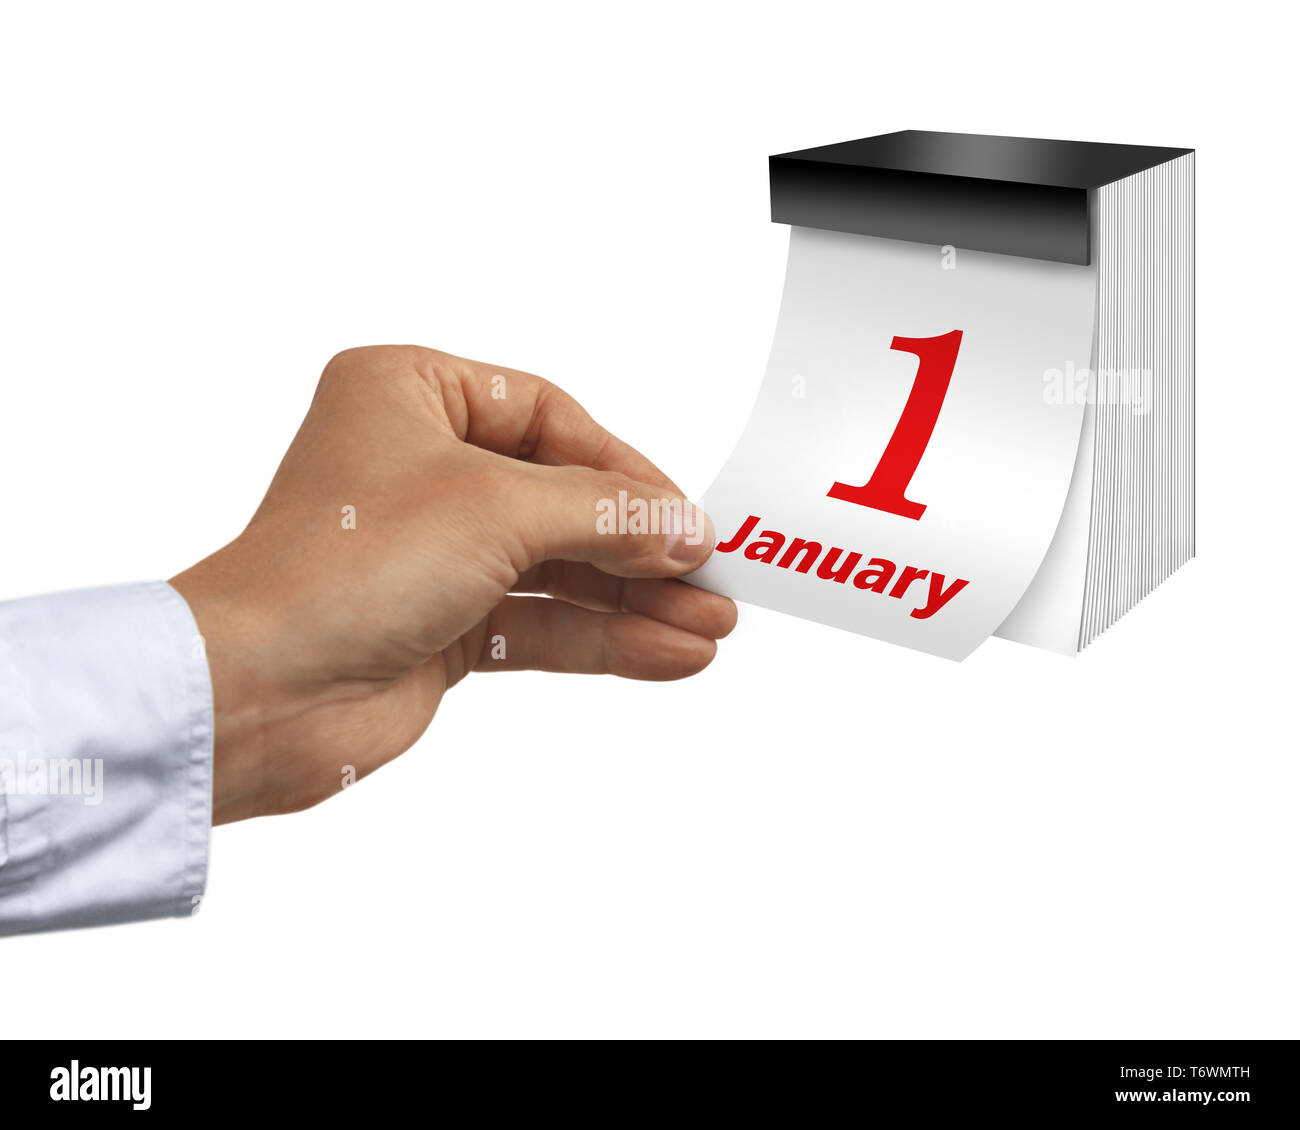 Gesture series, hand rips off calendar page Stock Photo